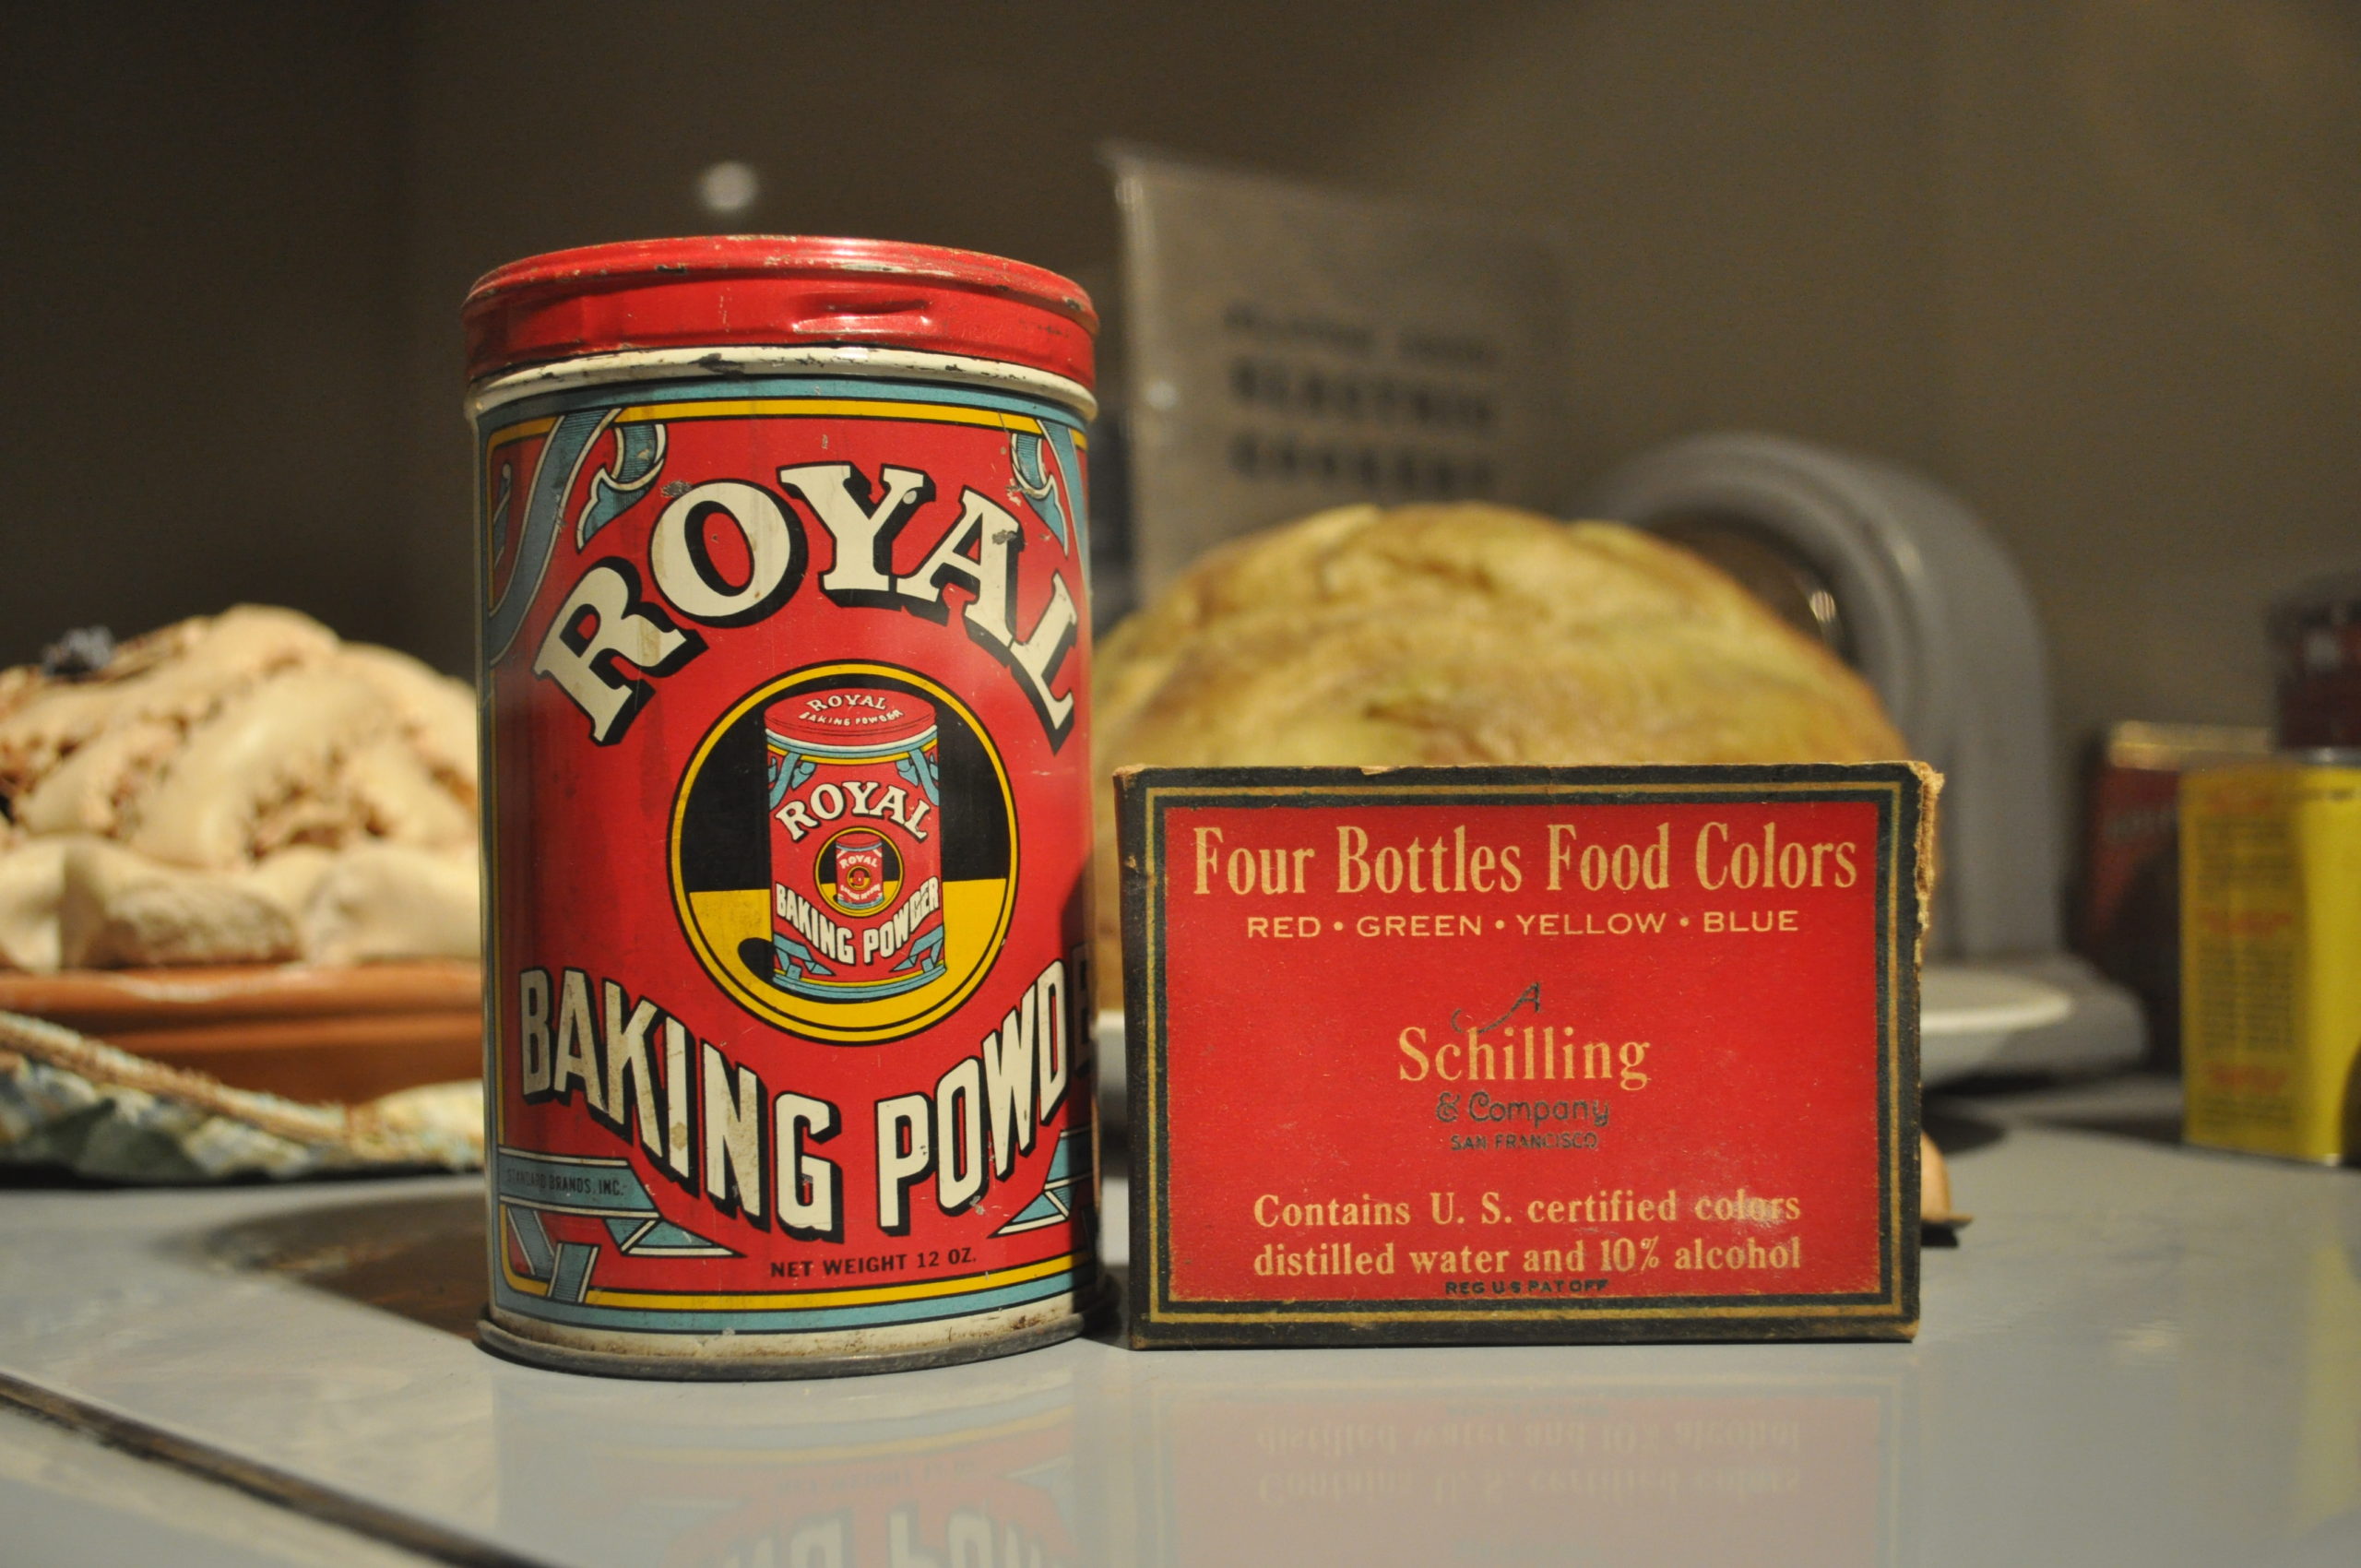 Royal Baking Powder and Schilling Food Coloring, early to mid 20th century, photographed at Edmonds Historical Museum, Edmonds, Washington, USA.